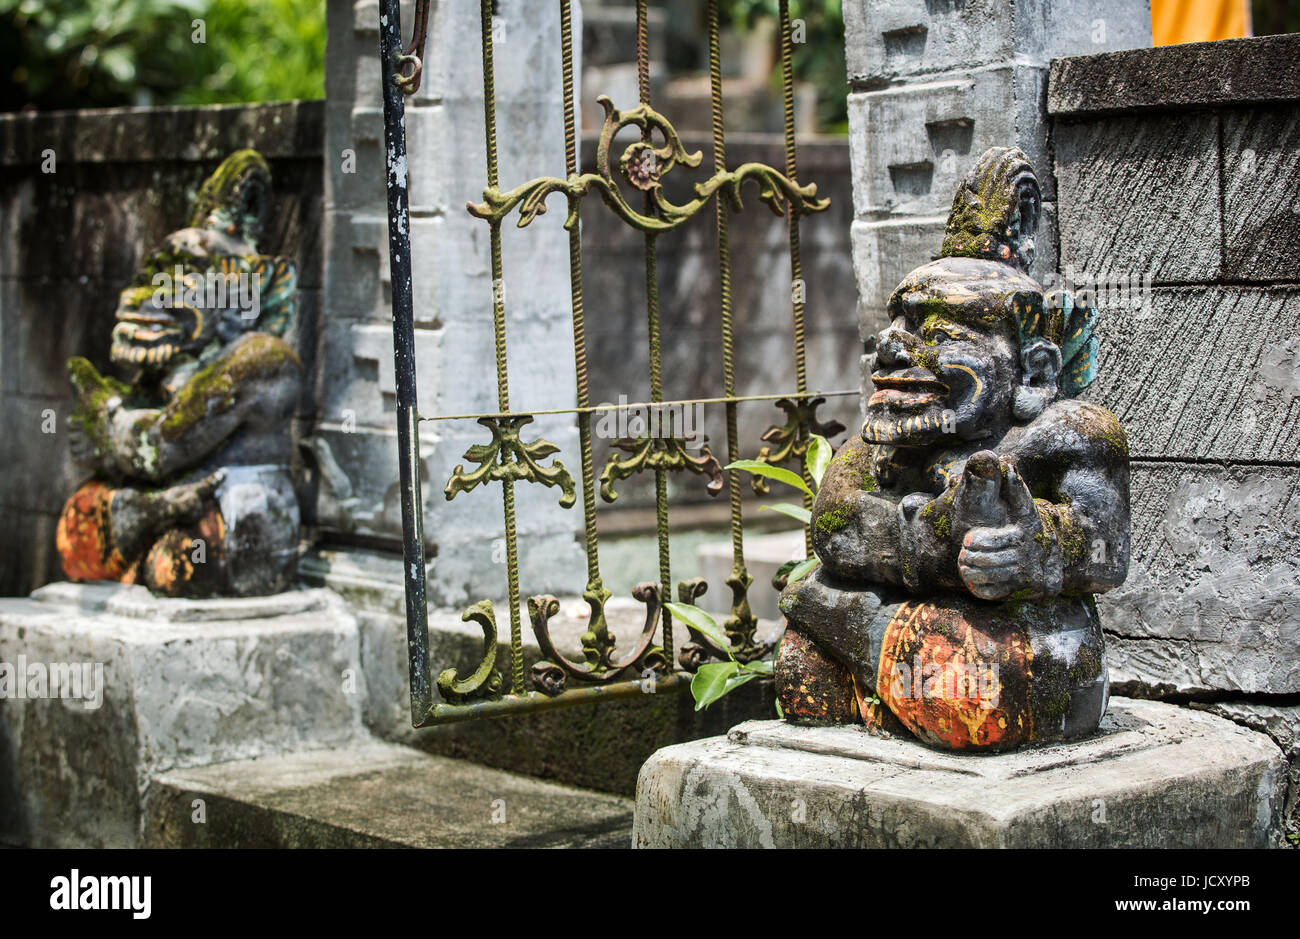 Balinese statues, unique effigies carved from stone guarding the entrance to a Hindu Temple. Balinese statues in the Hindu religion are common place Stock Photo